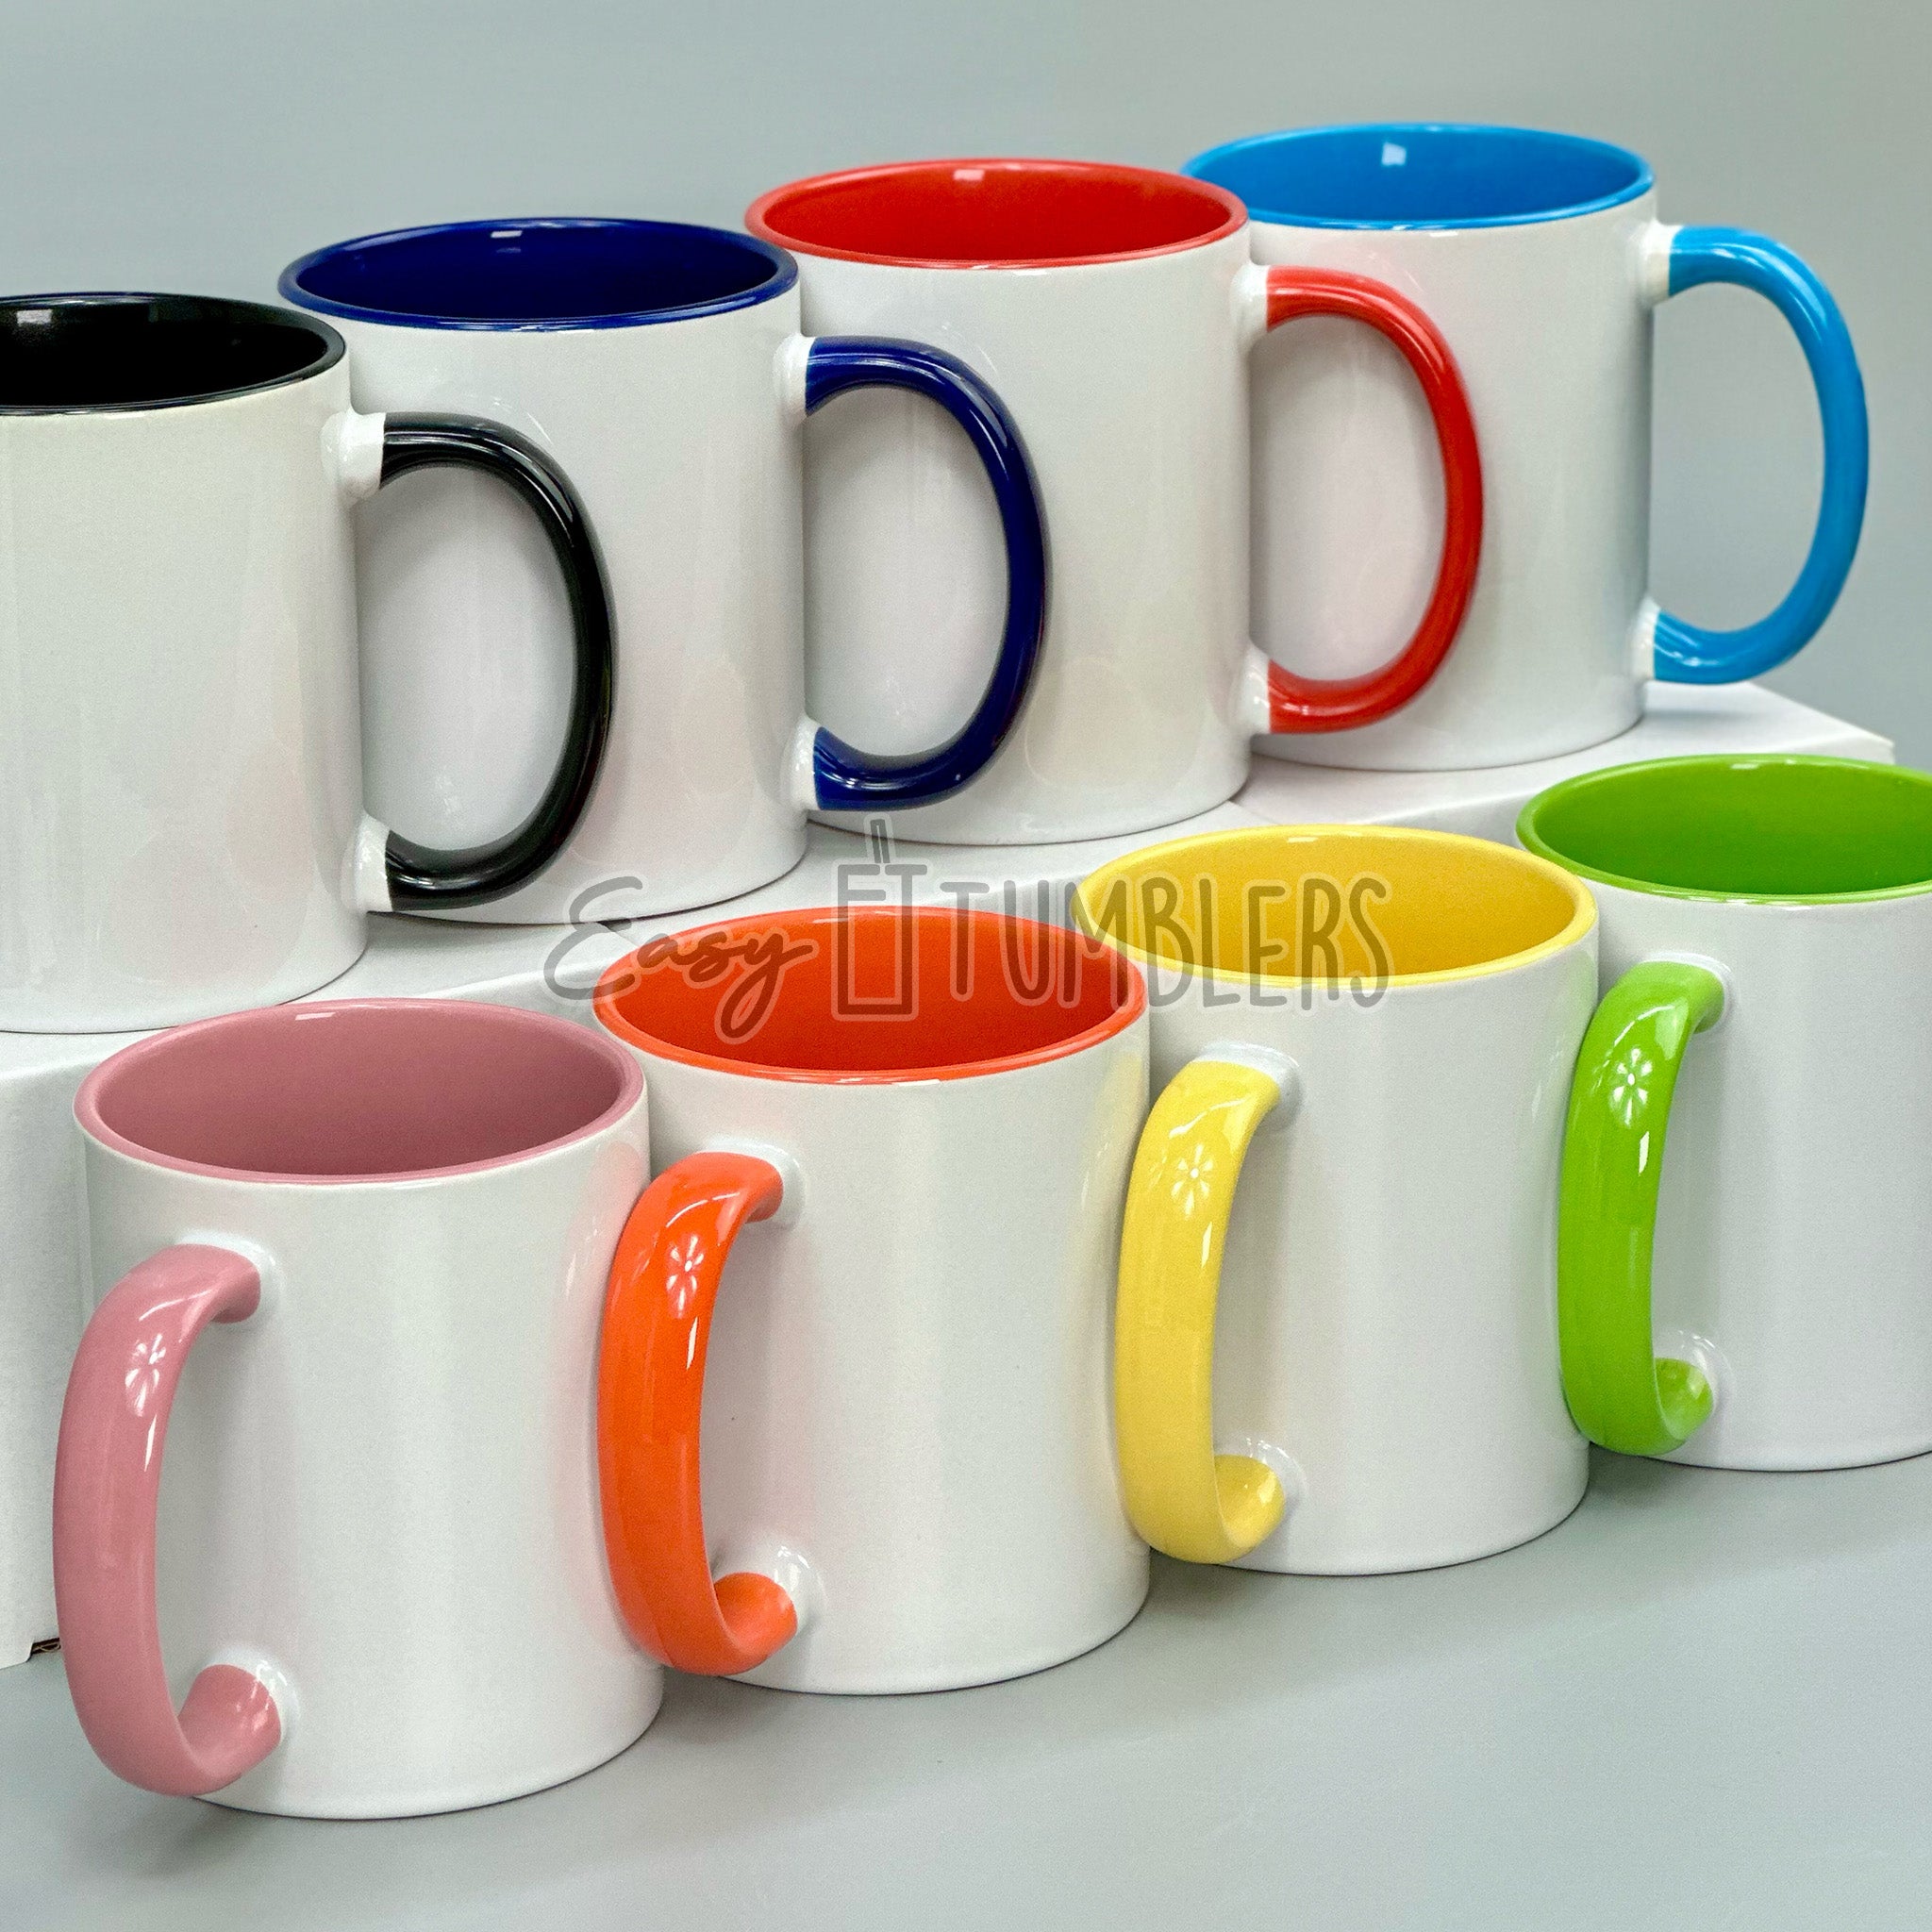 Case of 12 11 Oz. GREY Inner and Handle Ceramic Sublimation Mugs